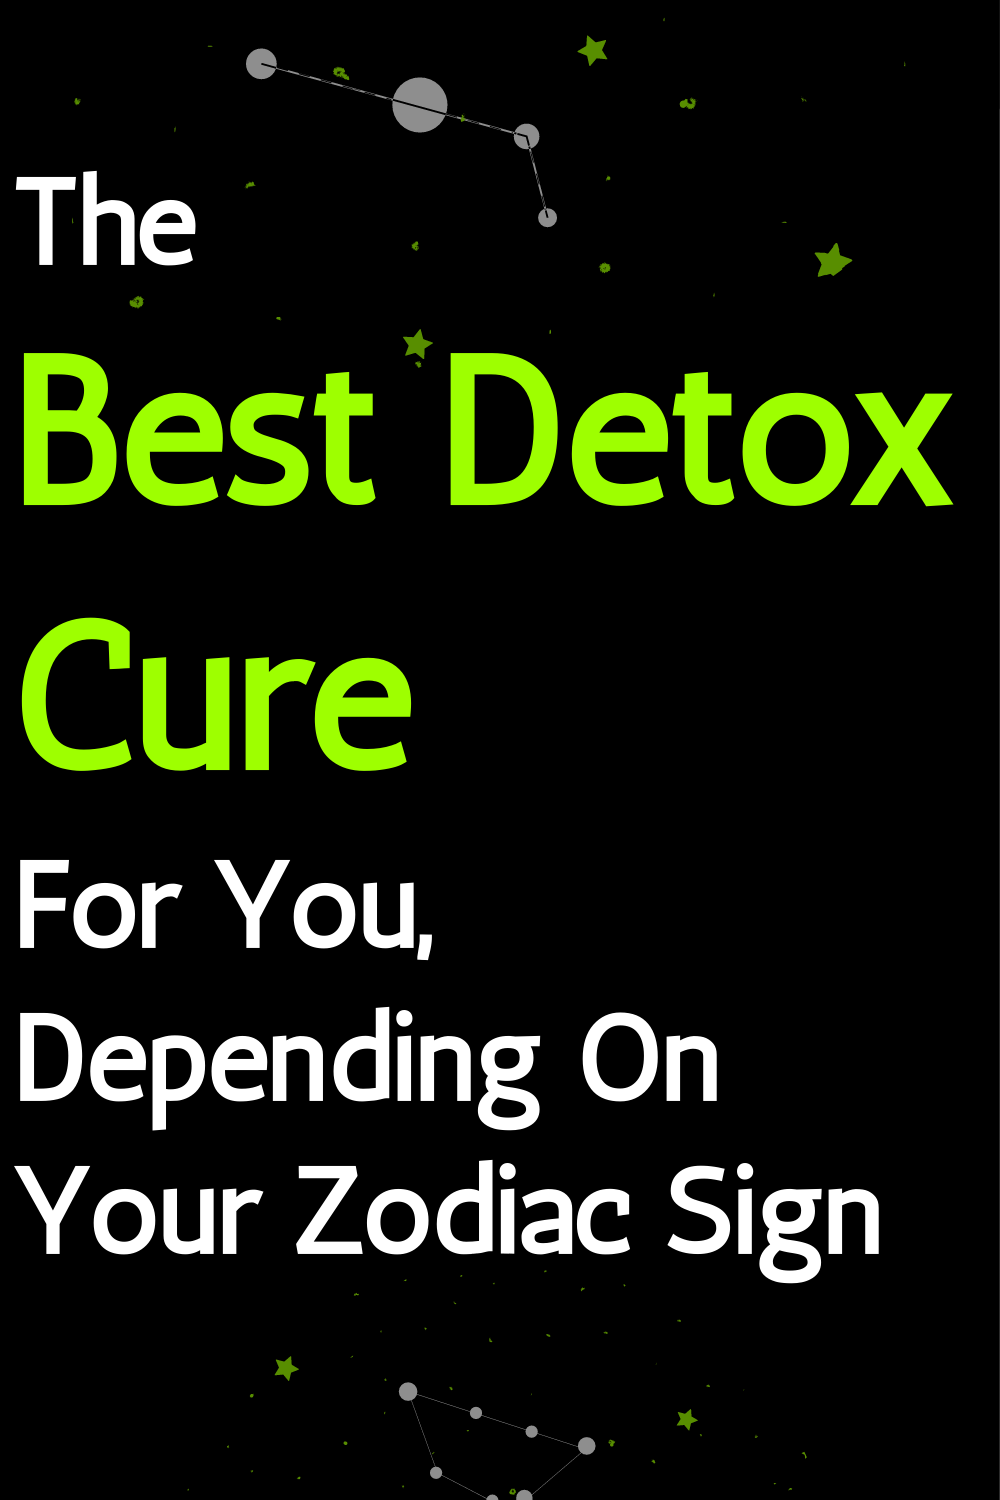 The Best Detox Cure For You, Depending On Your Zodiac Sign